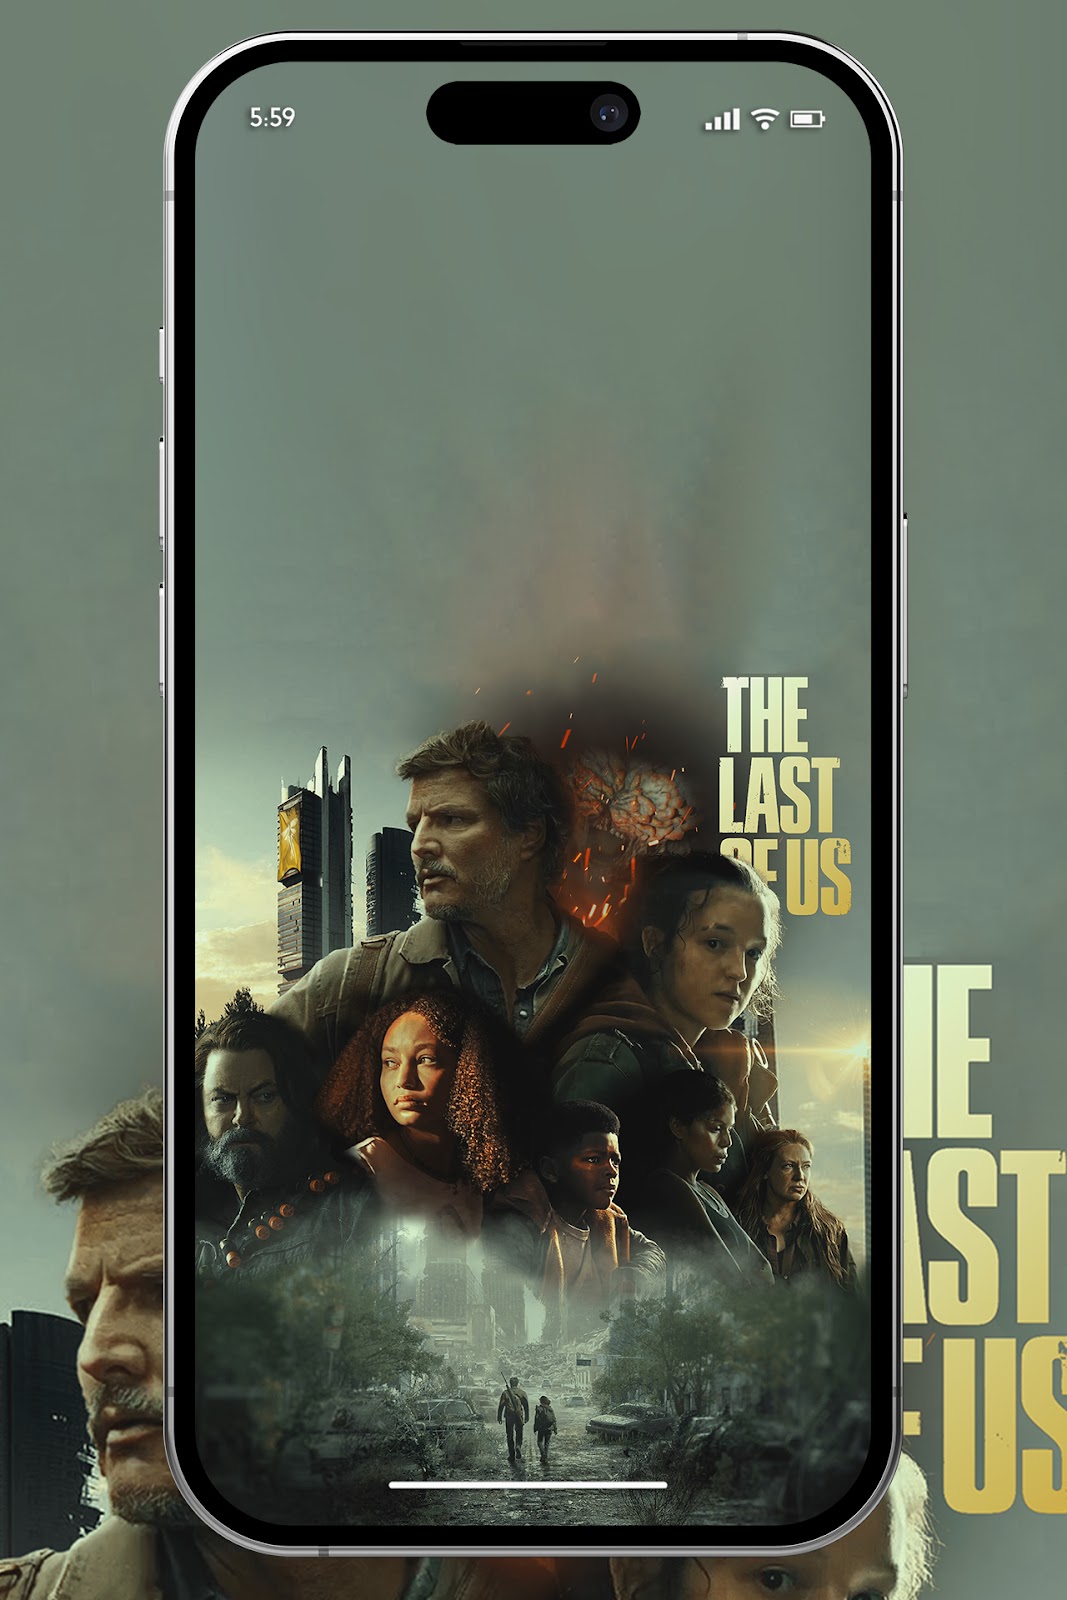 Surviving the Apocalypse: The Last of Us HBO Phone Wallpaper